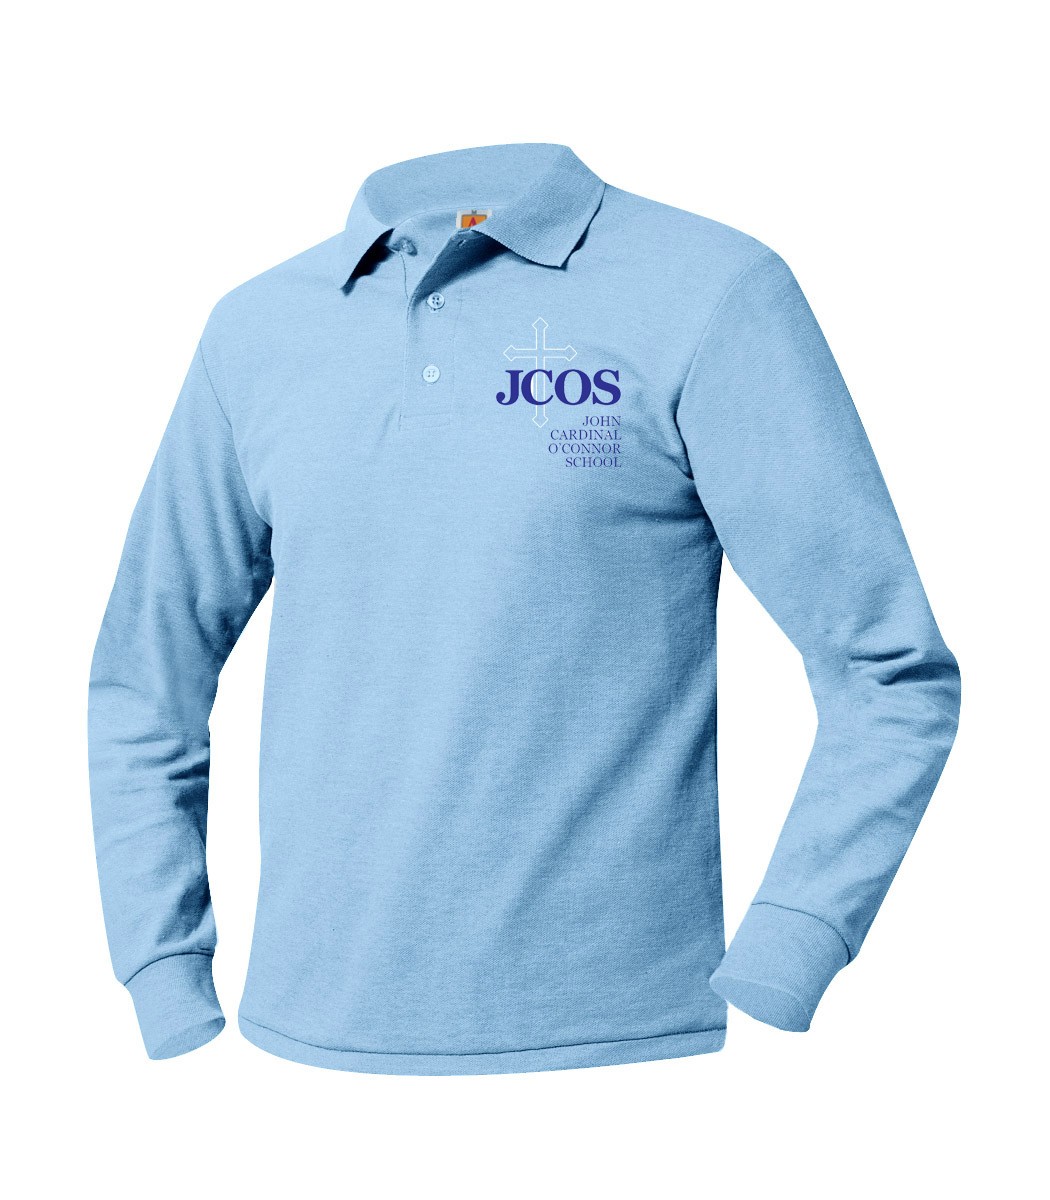 JCOS Staff L/S Polo w/ School Logo #F2 - Please Allow 3-4 Weeks for Delivery